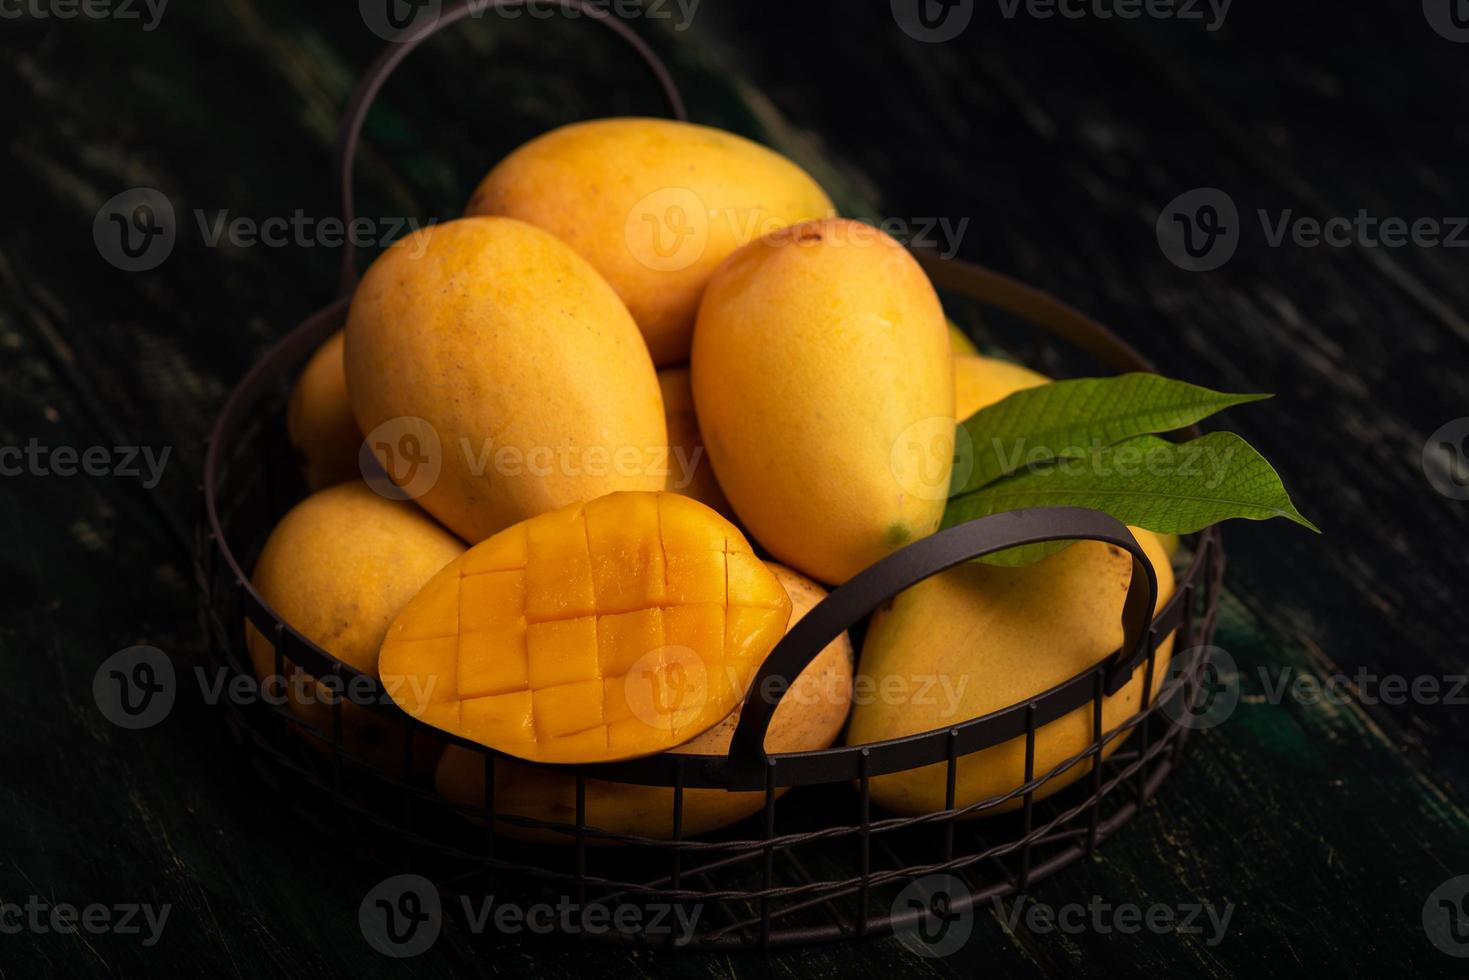 Cut and intact mangoes in the dark background photo